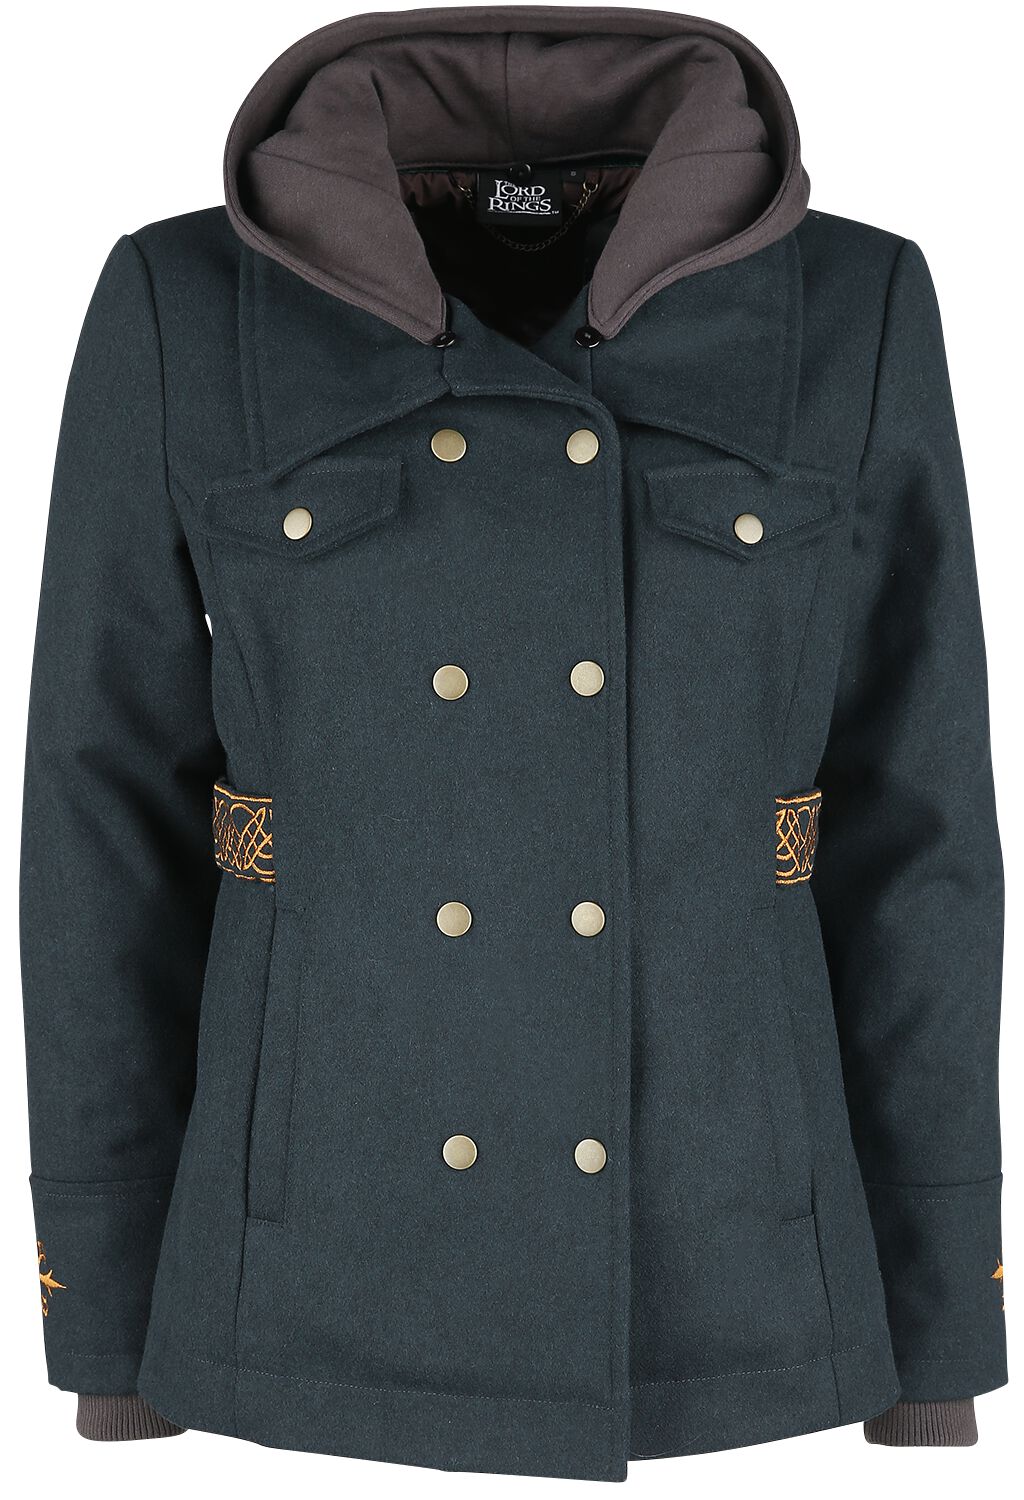 The Lord Of The Rings Rohan Winter Jacket dark green